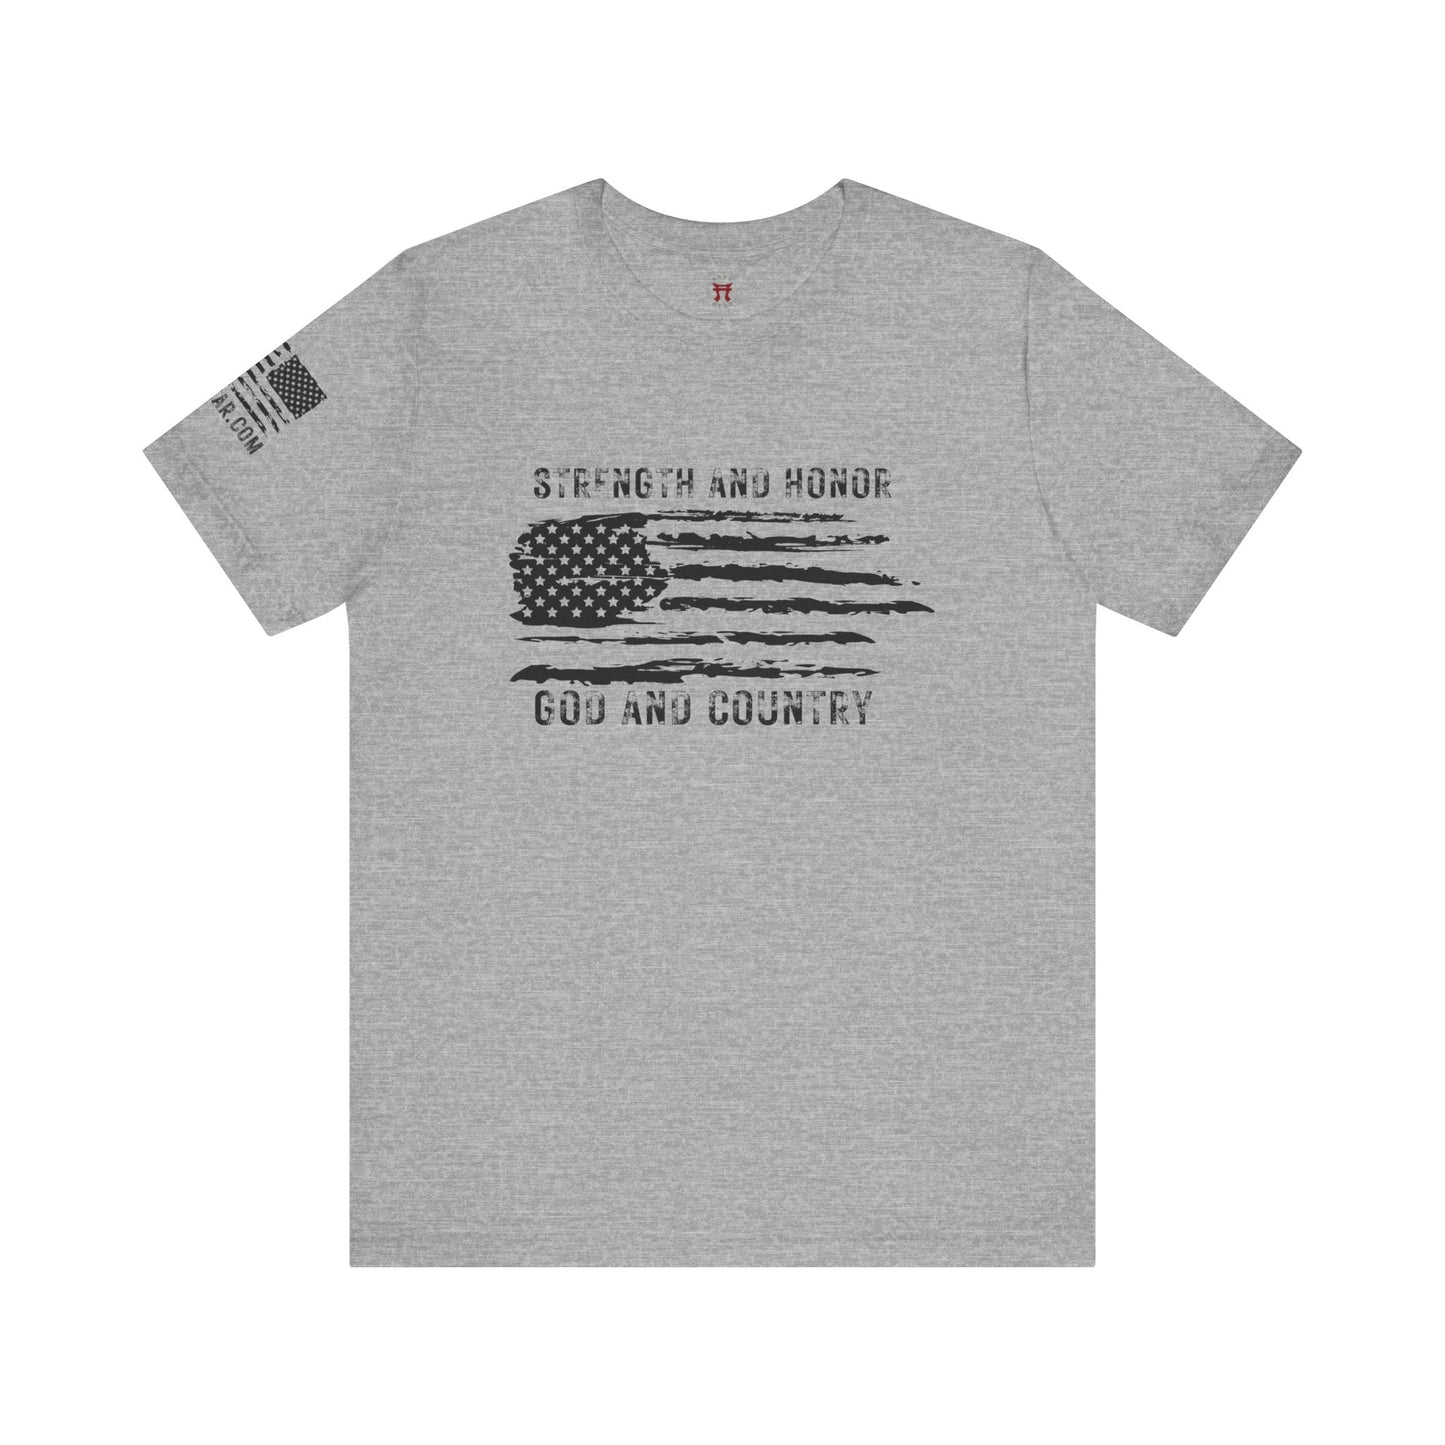 Rakkgear GOD and Country Short Sleeve Tee in grey